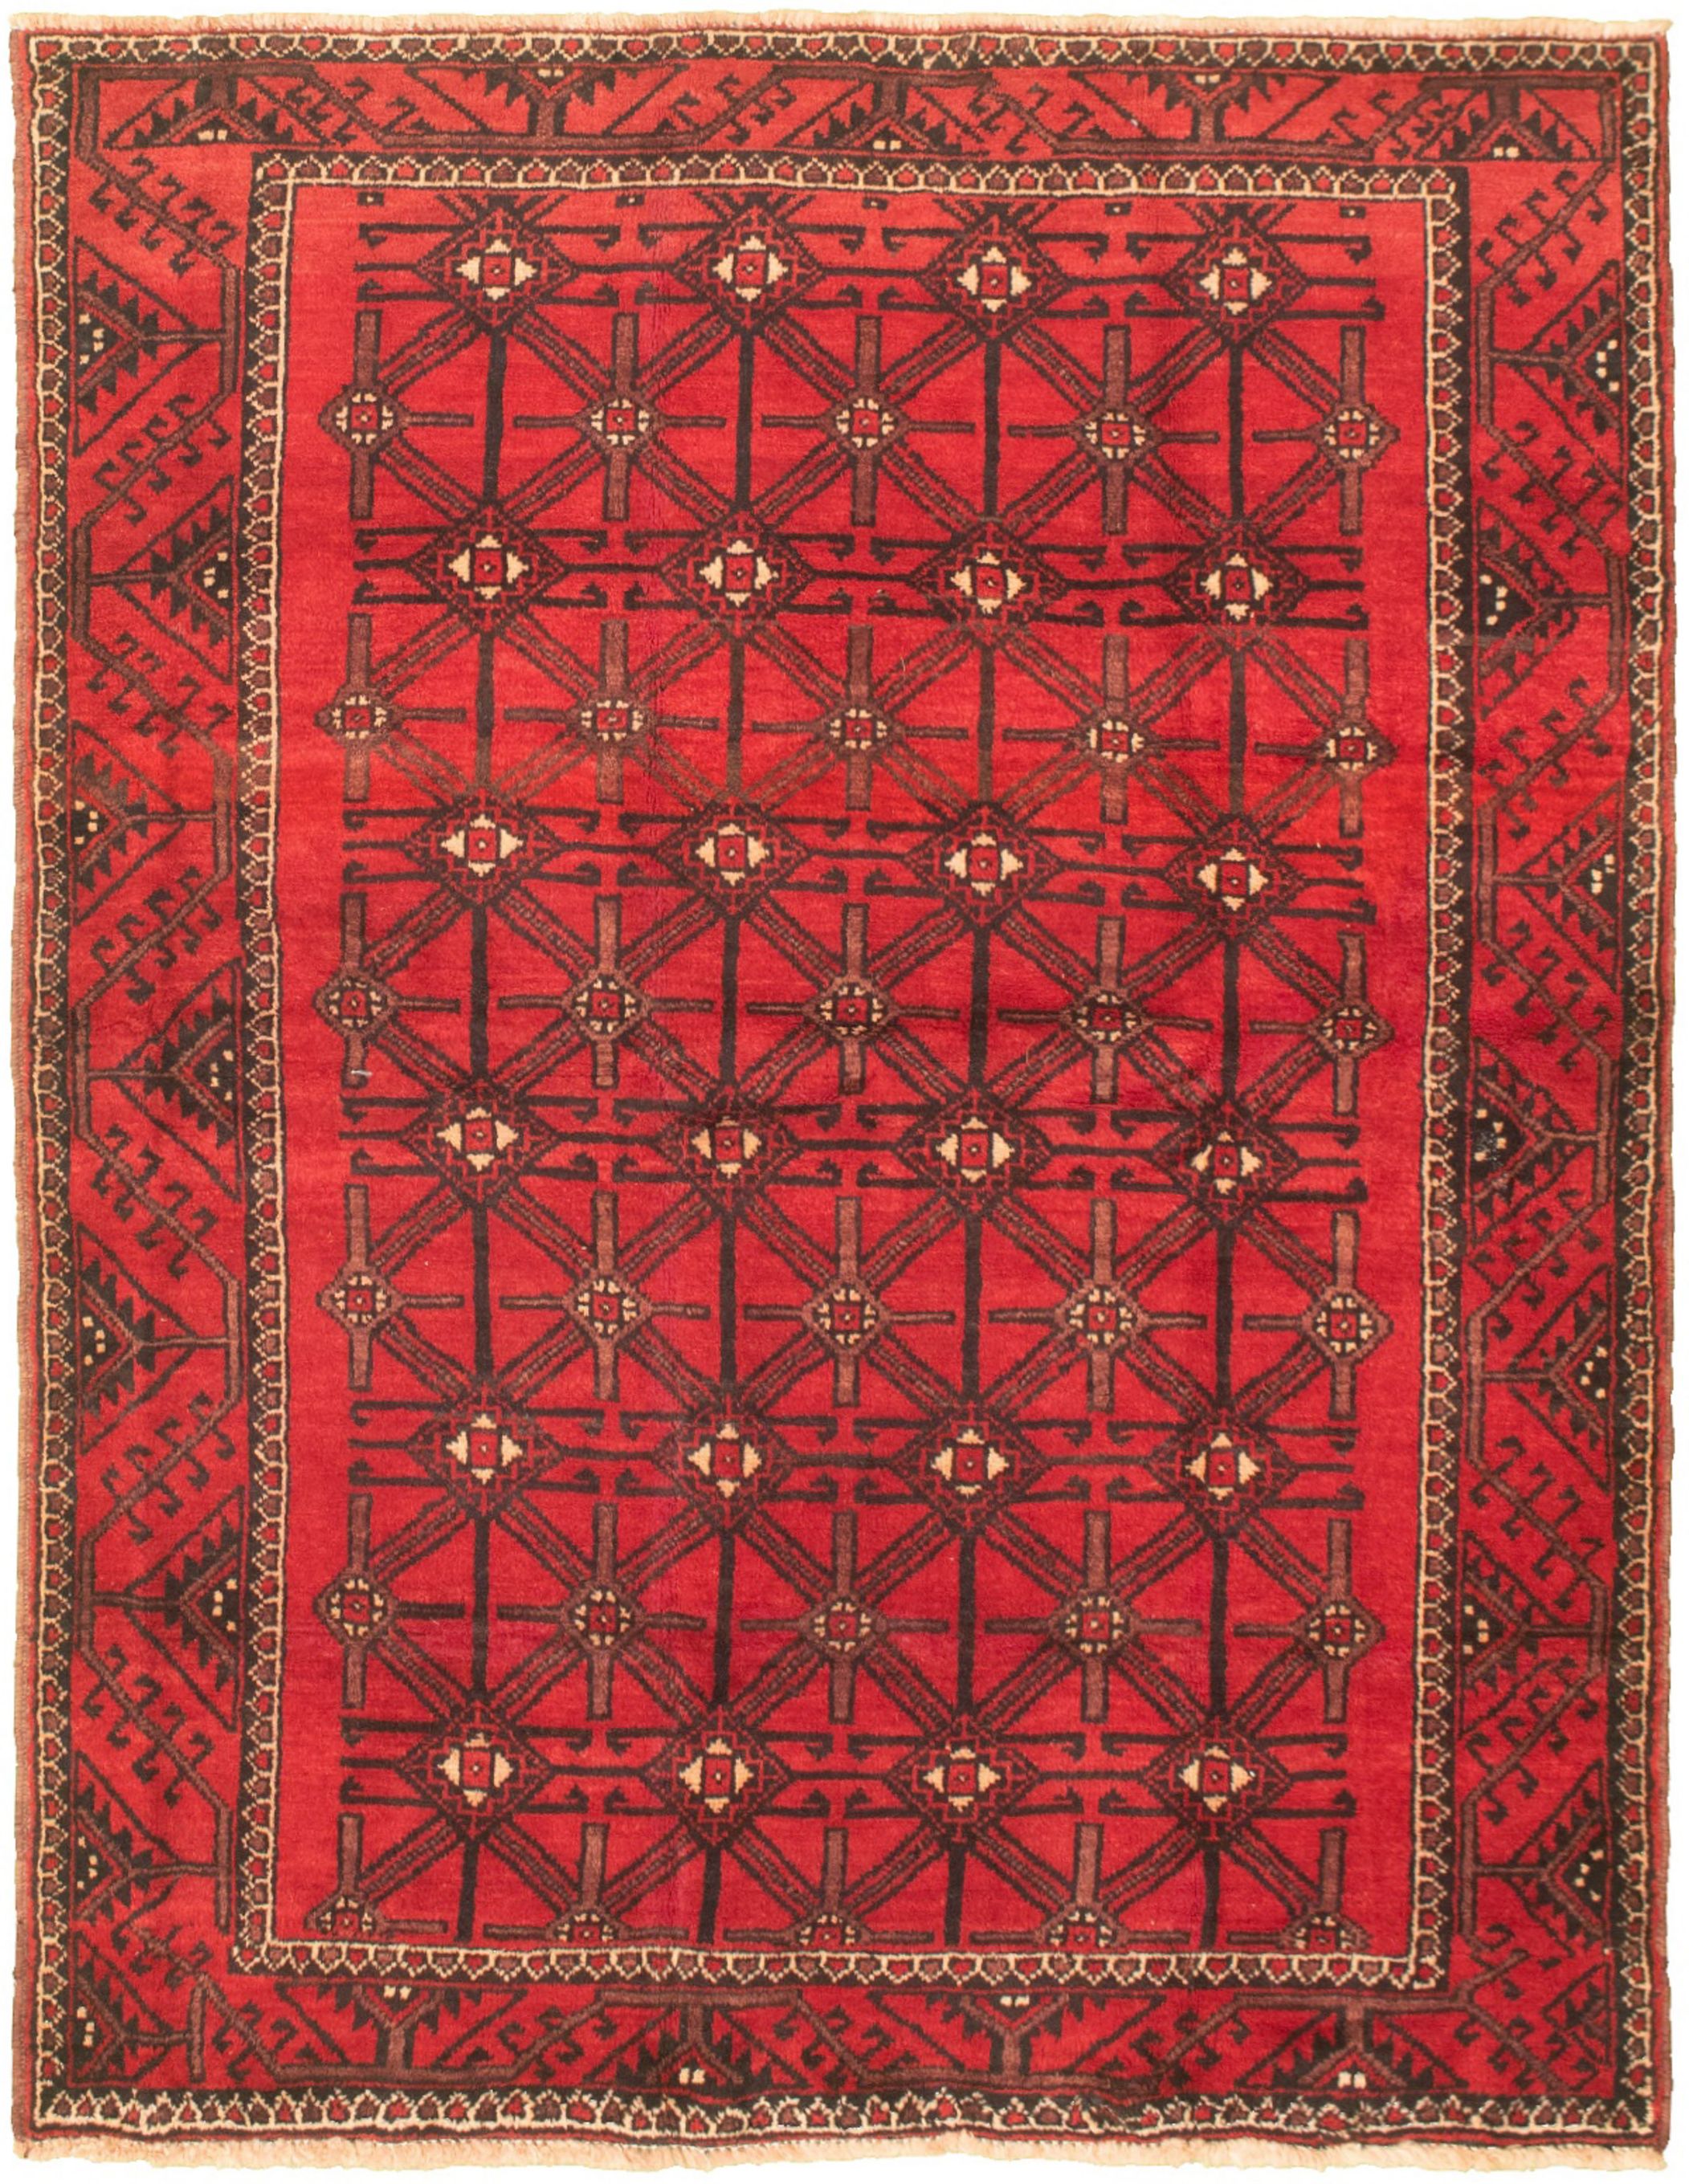 Hand-knotted Authentic Turkish Red Wool Rug 5'3" x 7'1" Size: 5'3" x 7'1"  